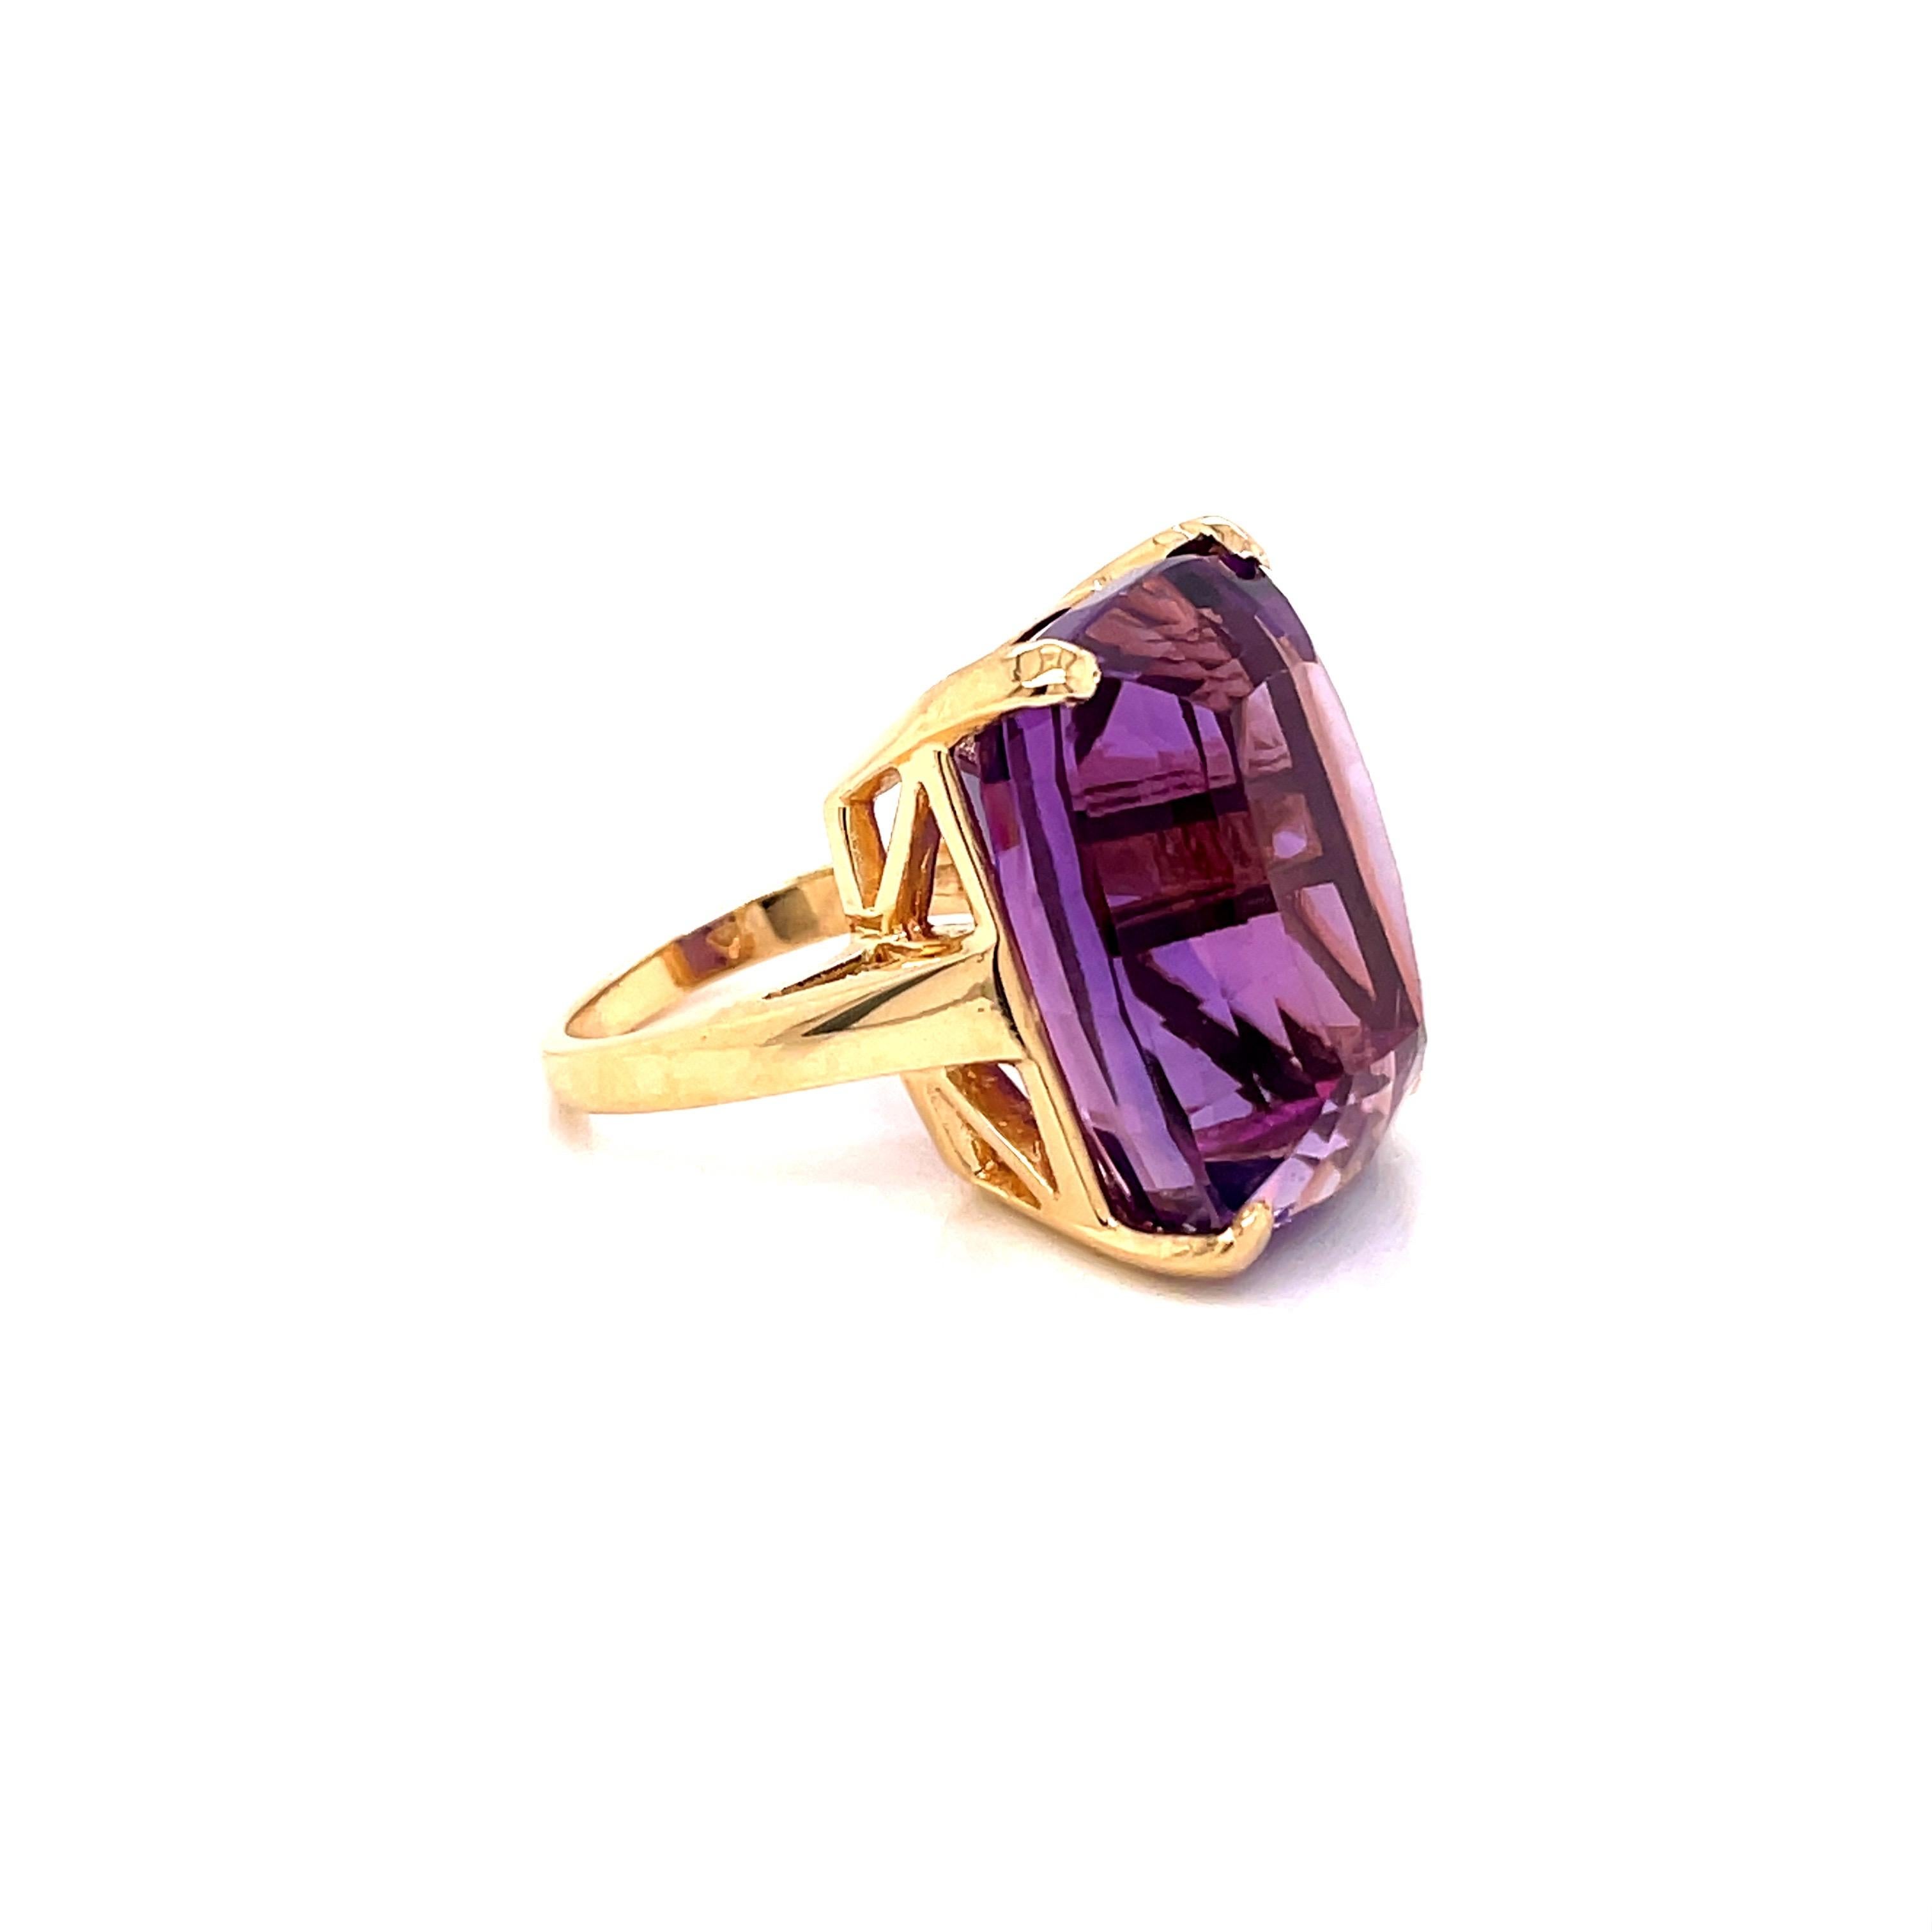 Contemporary Vintage 1970's 35ct Cushion Cut Amethyst Ring